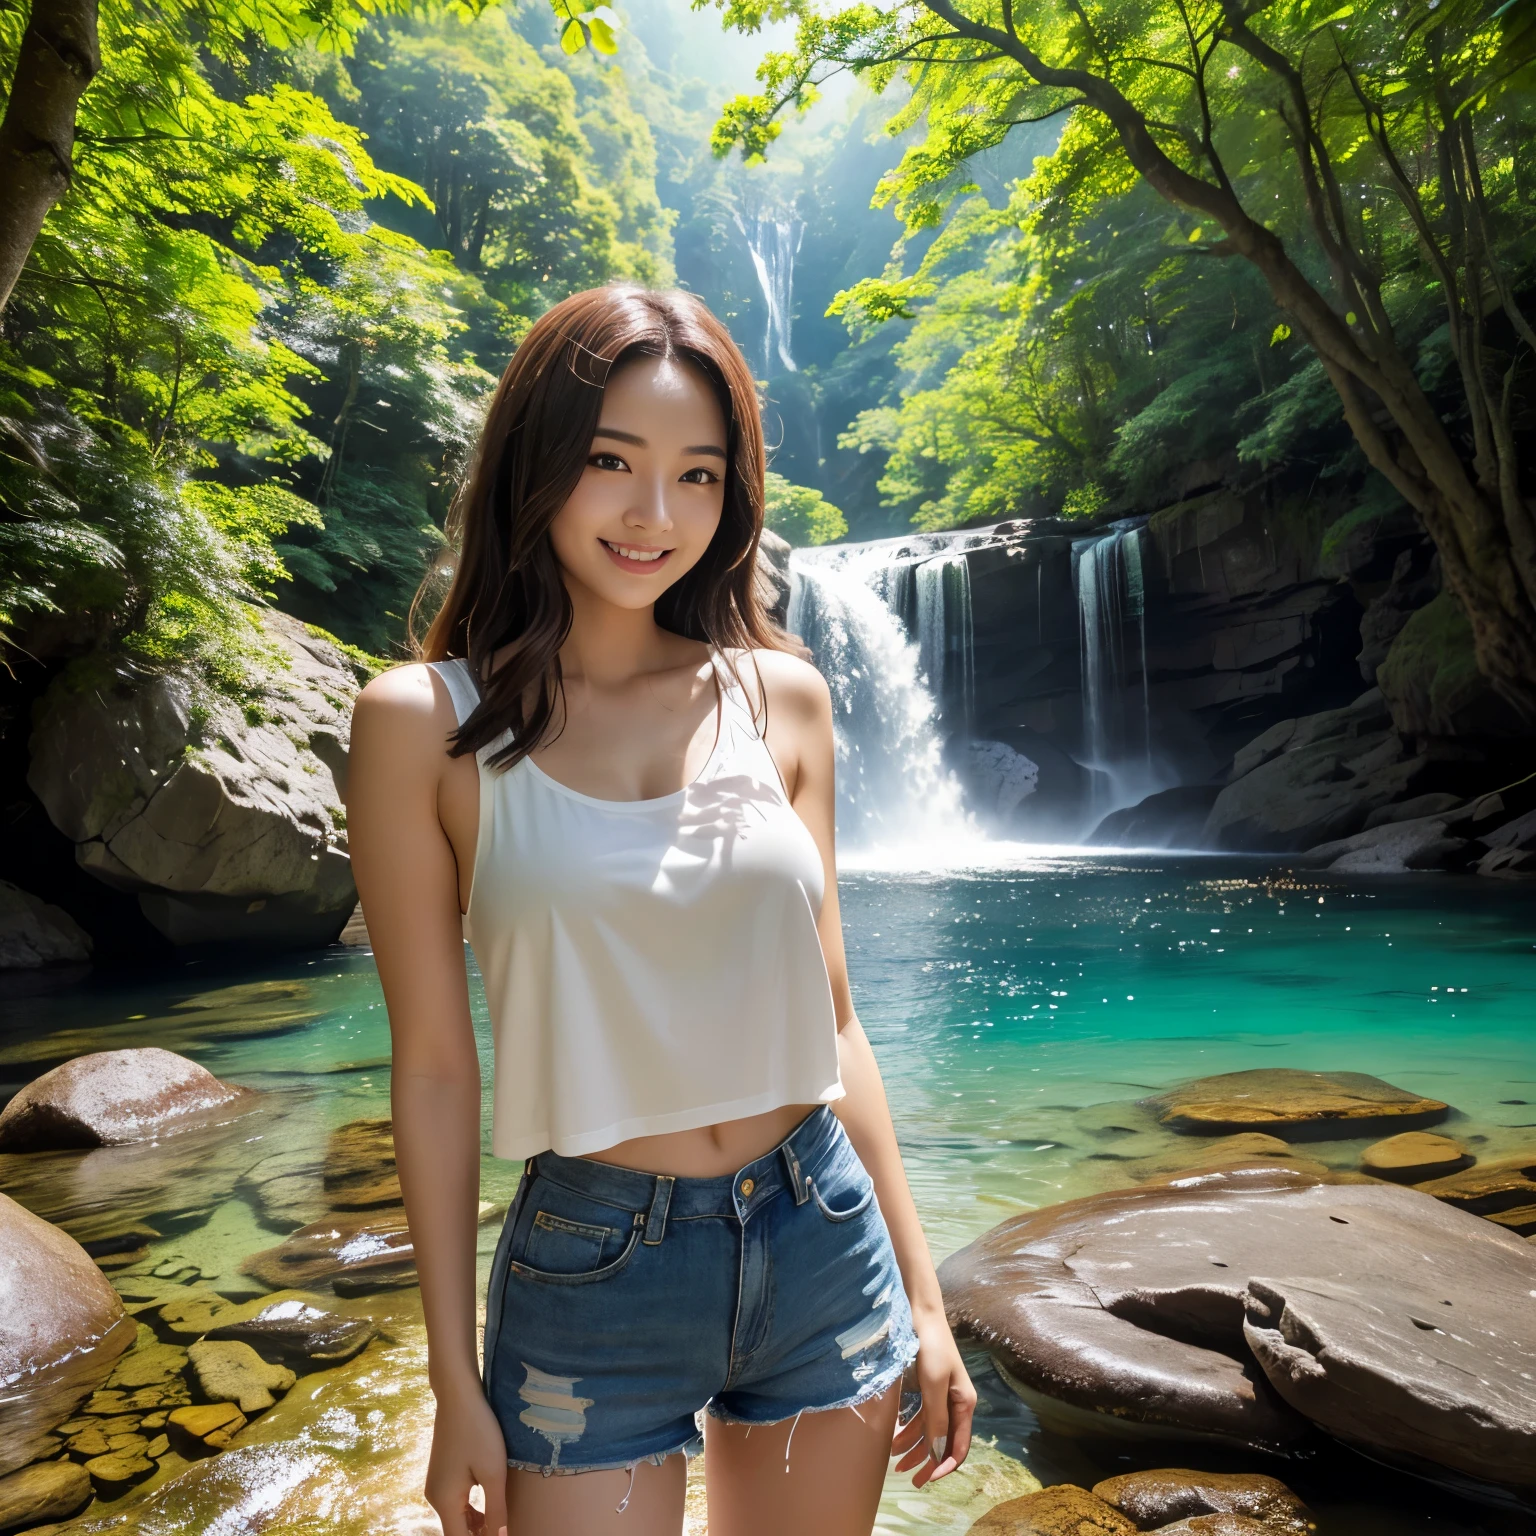 (highest quality、masterpiece、8K、Highest image quality、hyper realism、Award-winning work)、(1 woman:1.3)、(Photographs of people:1.3)、hat、tank top shirt、shorts、standing elegantly、huge waterfall、beautiful spectacular waterfall、Sparkling water、Light fog、blurred background、detailed and intricate forest、In a mysterious and majestic forest、many beautiful trees々、big rock、rock wall、Majestic nature、A woman in the majestic forest、beautiful sunlight filtering through the foliage、beautiful clear water、the biggest smile when you look at me、upper body photo、accurate anatomy、natural makeup、Super high-definition glossy skin、Super high-definition glowing beautiful skin、Ultra high definition glossy lips、Super high definition beautiful teeth